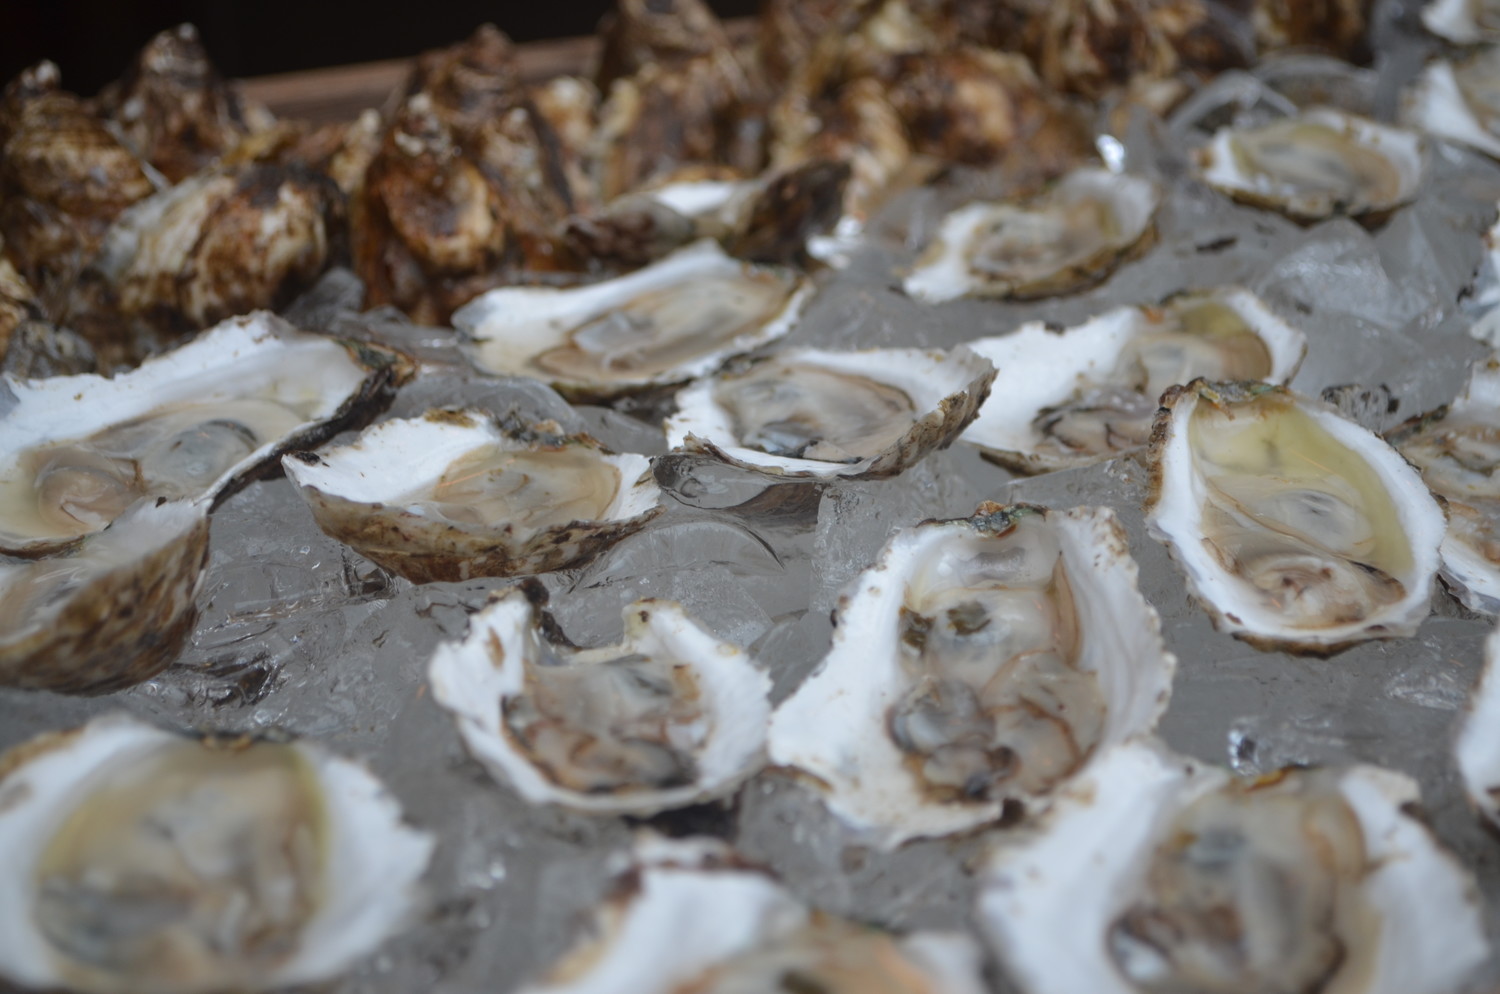 The oysters come from Peconic Gold Oysters and Lucky 13 Oysters.